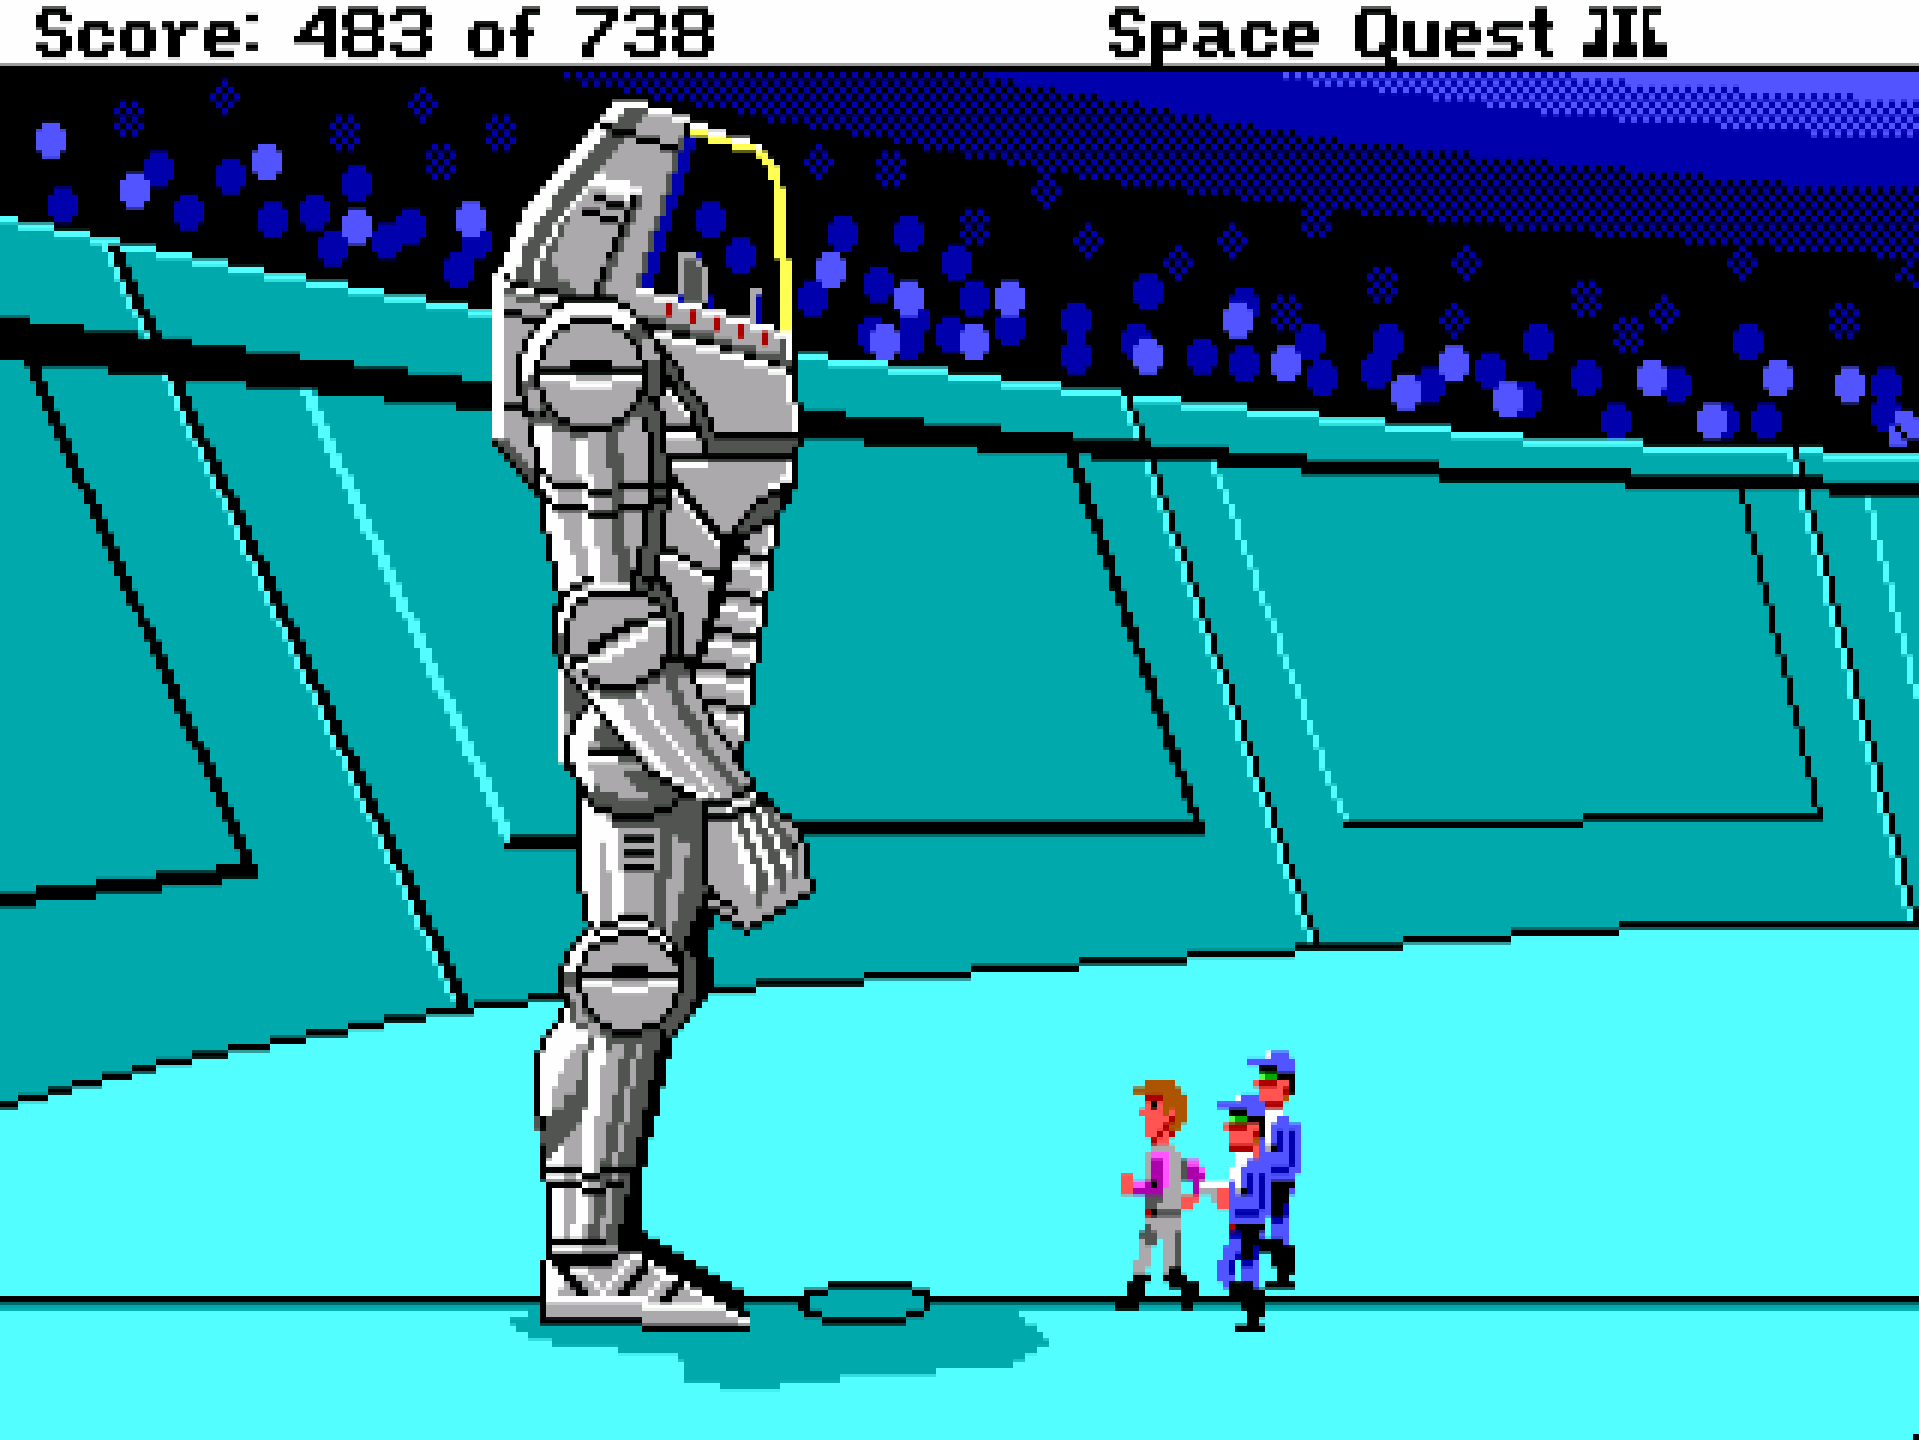 Quest 3 strap. Sierra Space Quest. Space Quest 3. Space Quest Remastered. Space Quest III the Pirates of Pestulon.